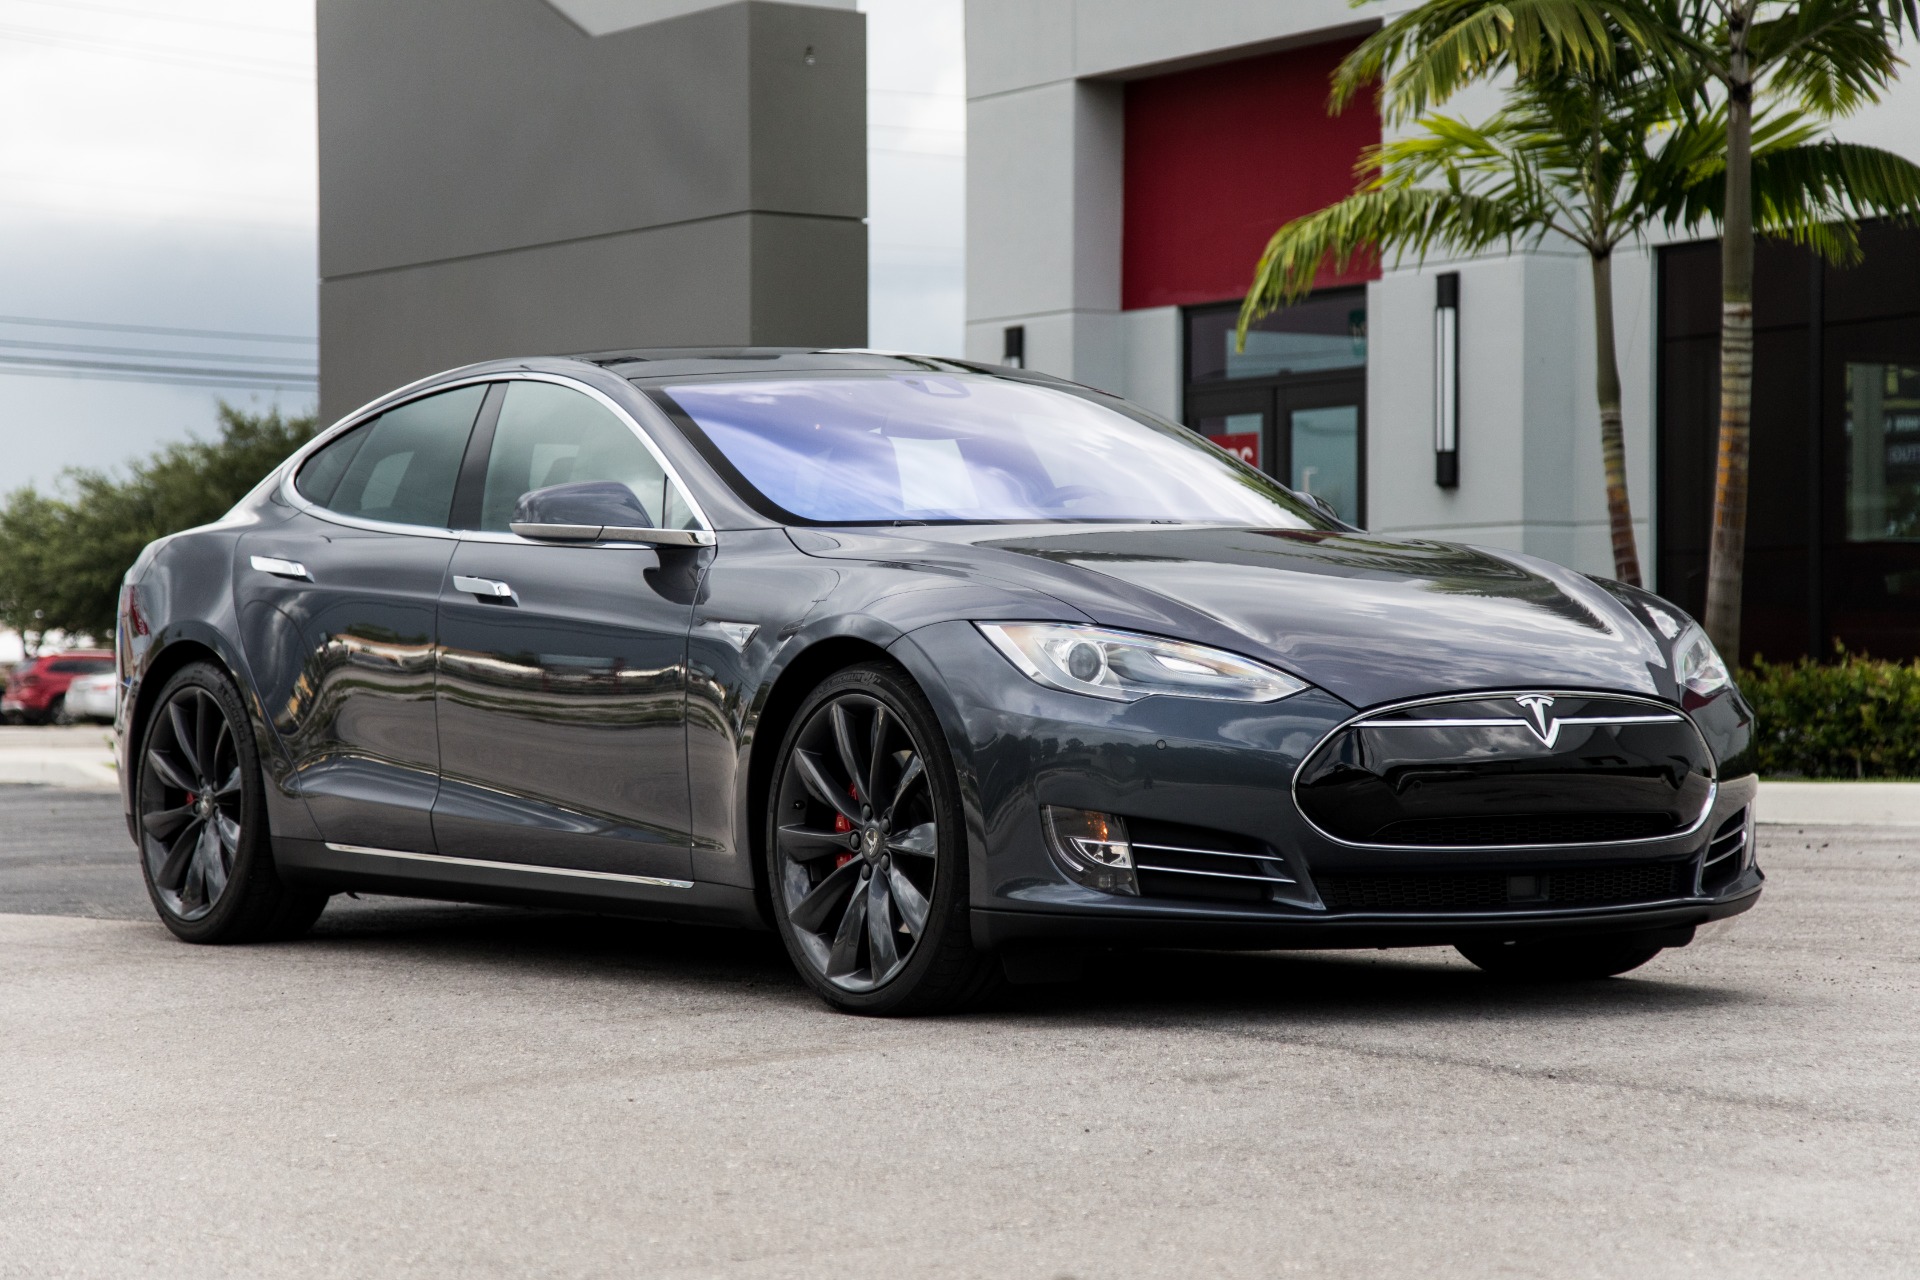 Used 2014 Tesla Model S P85D For Sale 64 700 Marino Performance 